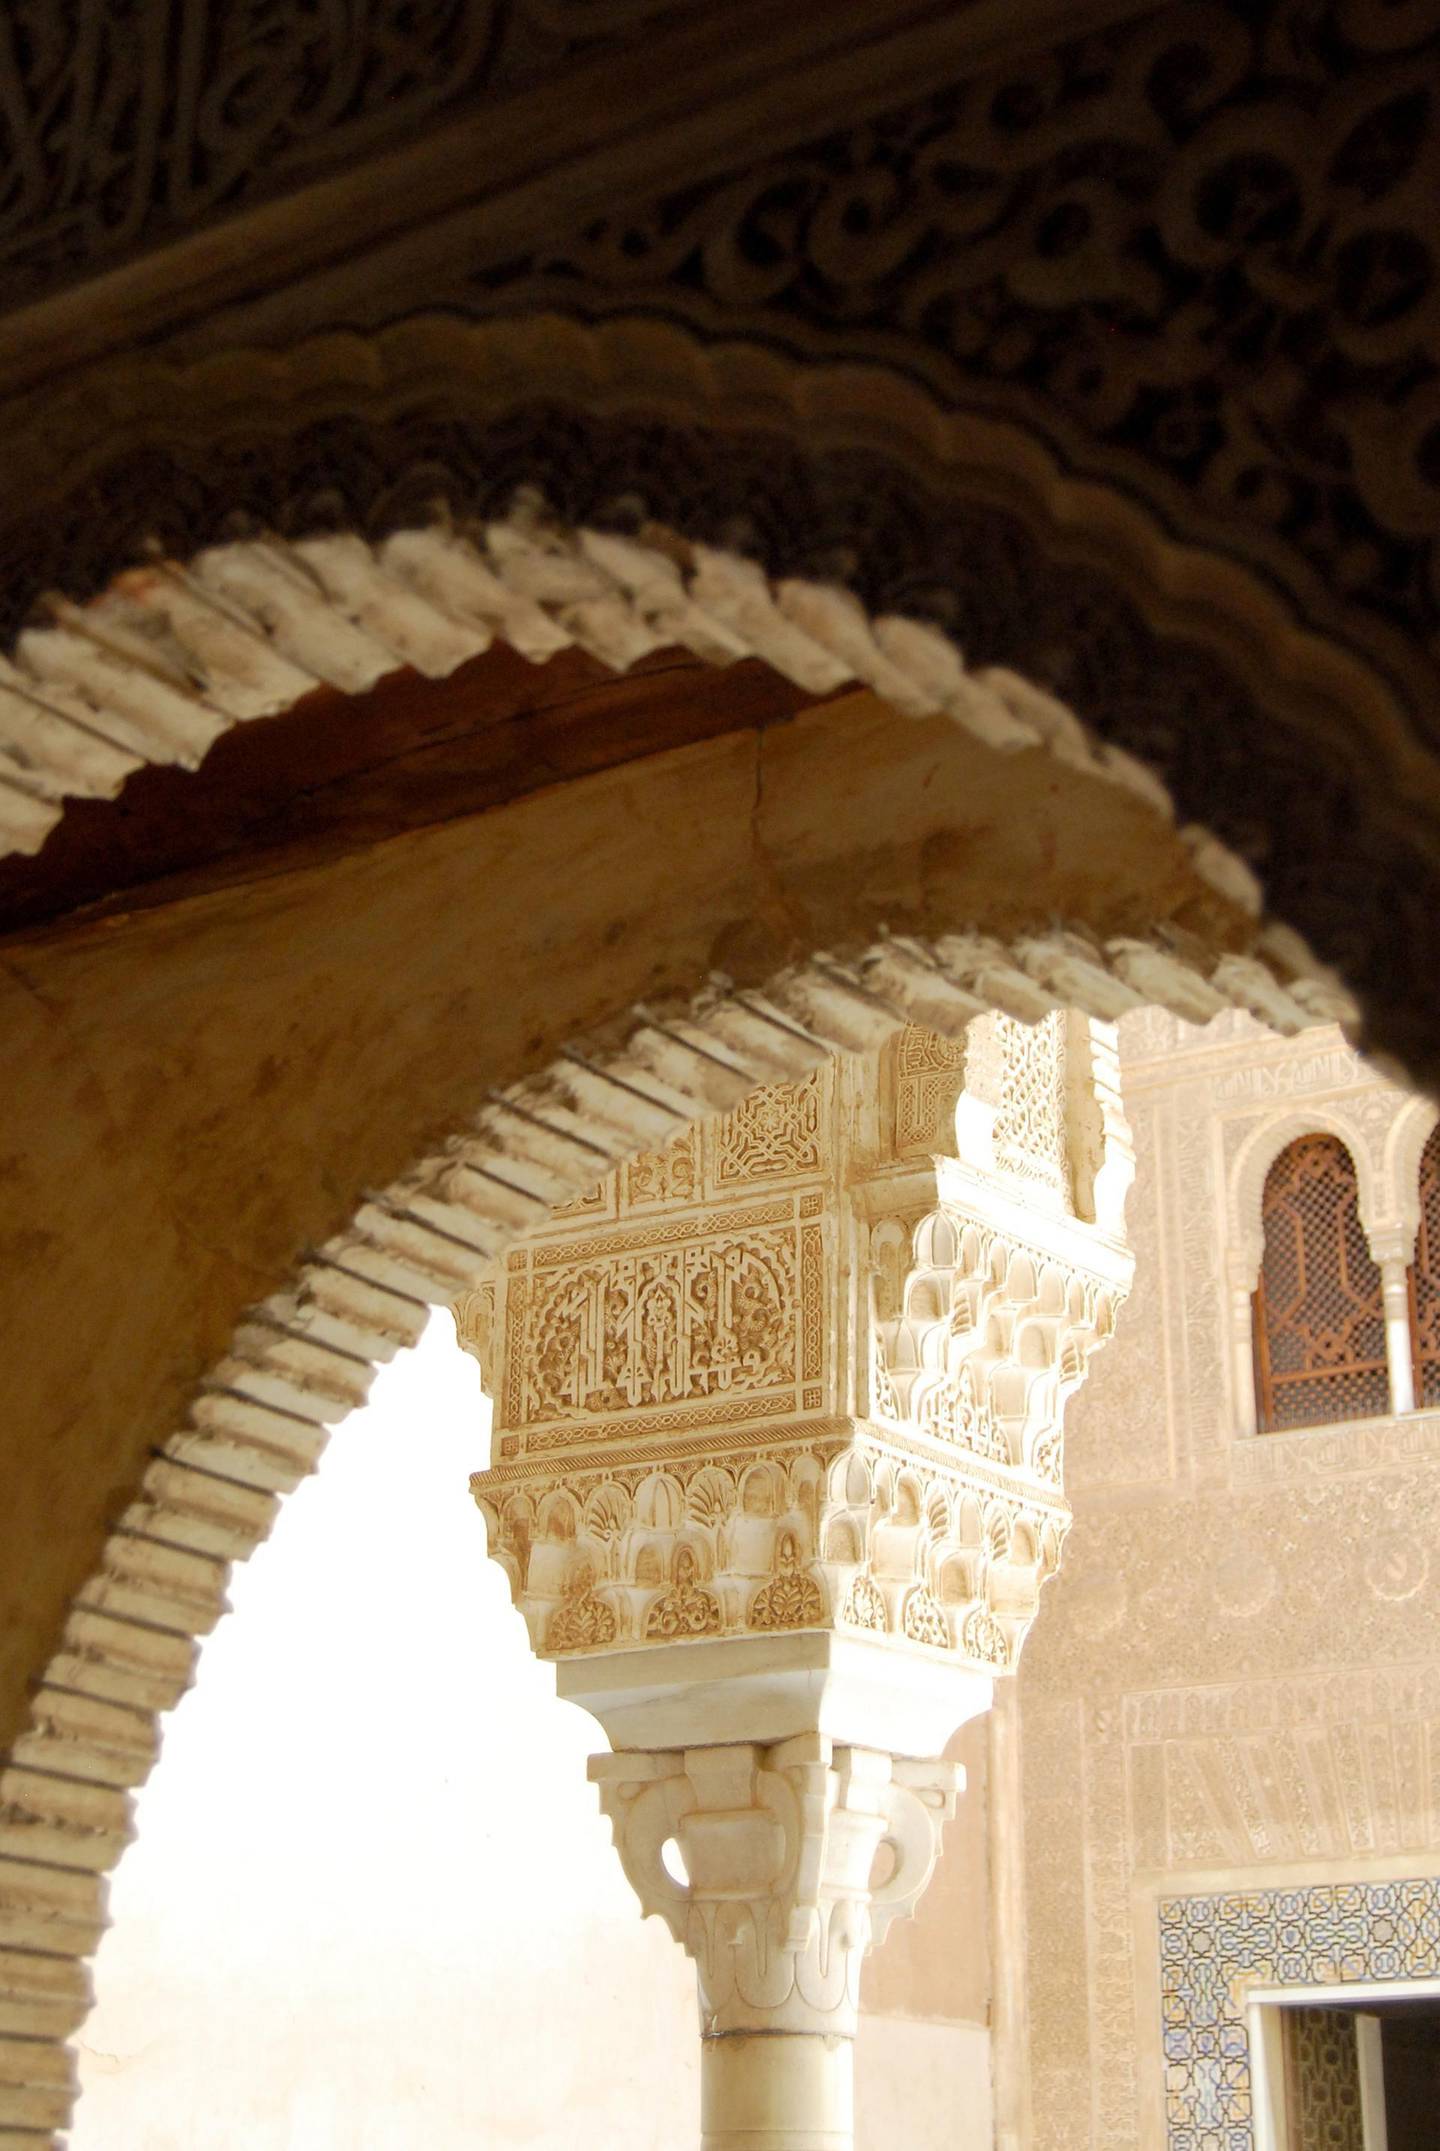 Architectural detail from within the Alhambra. Pixabay